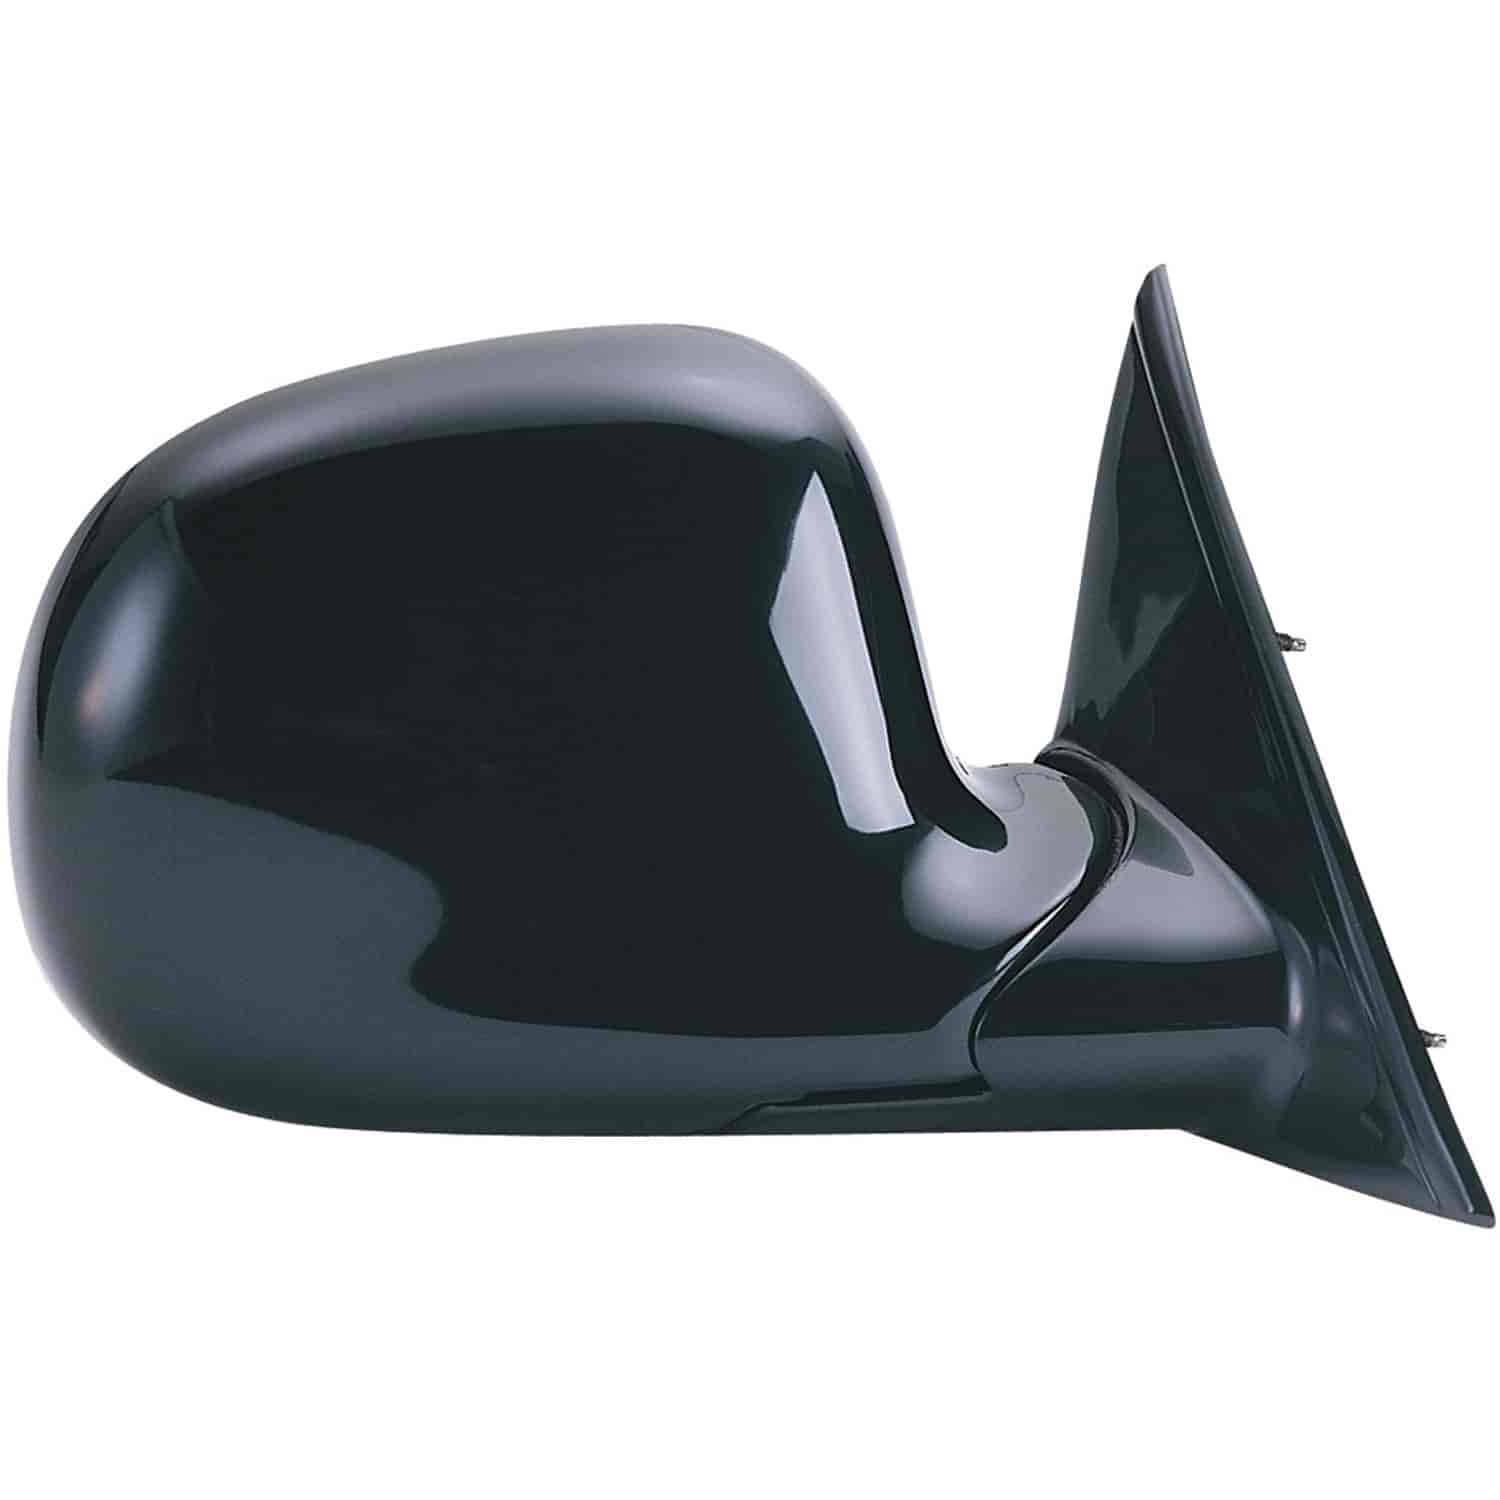 OEM Style Replacement Mirror Fits 1994 to 1997 Chevy S10, GMC Sonoma & Isuzu Hombre Pickup